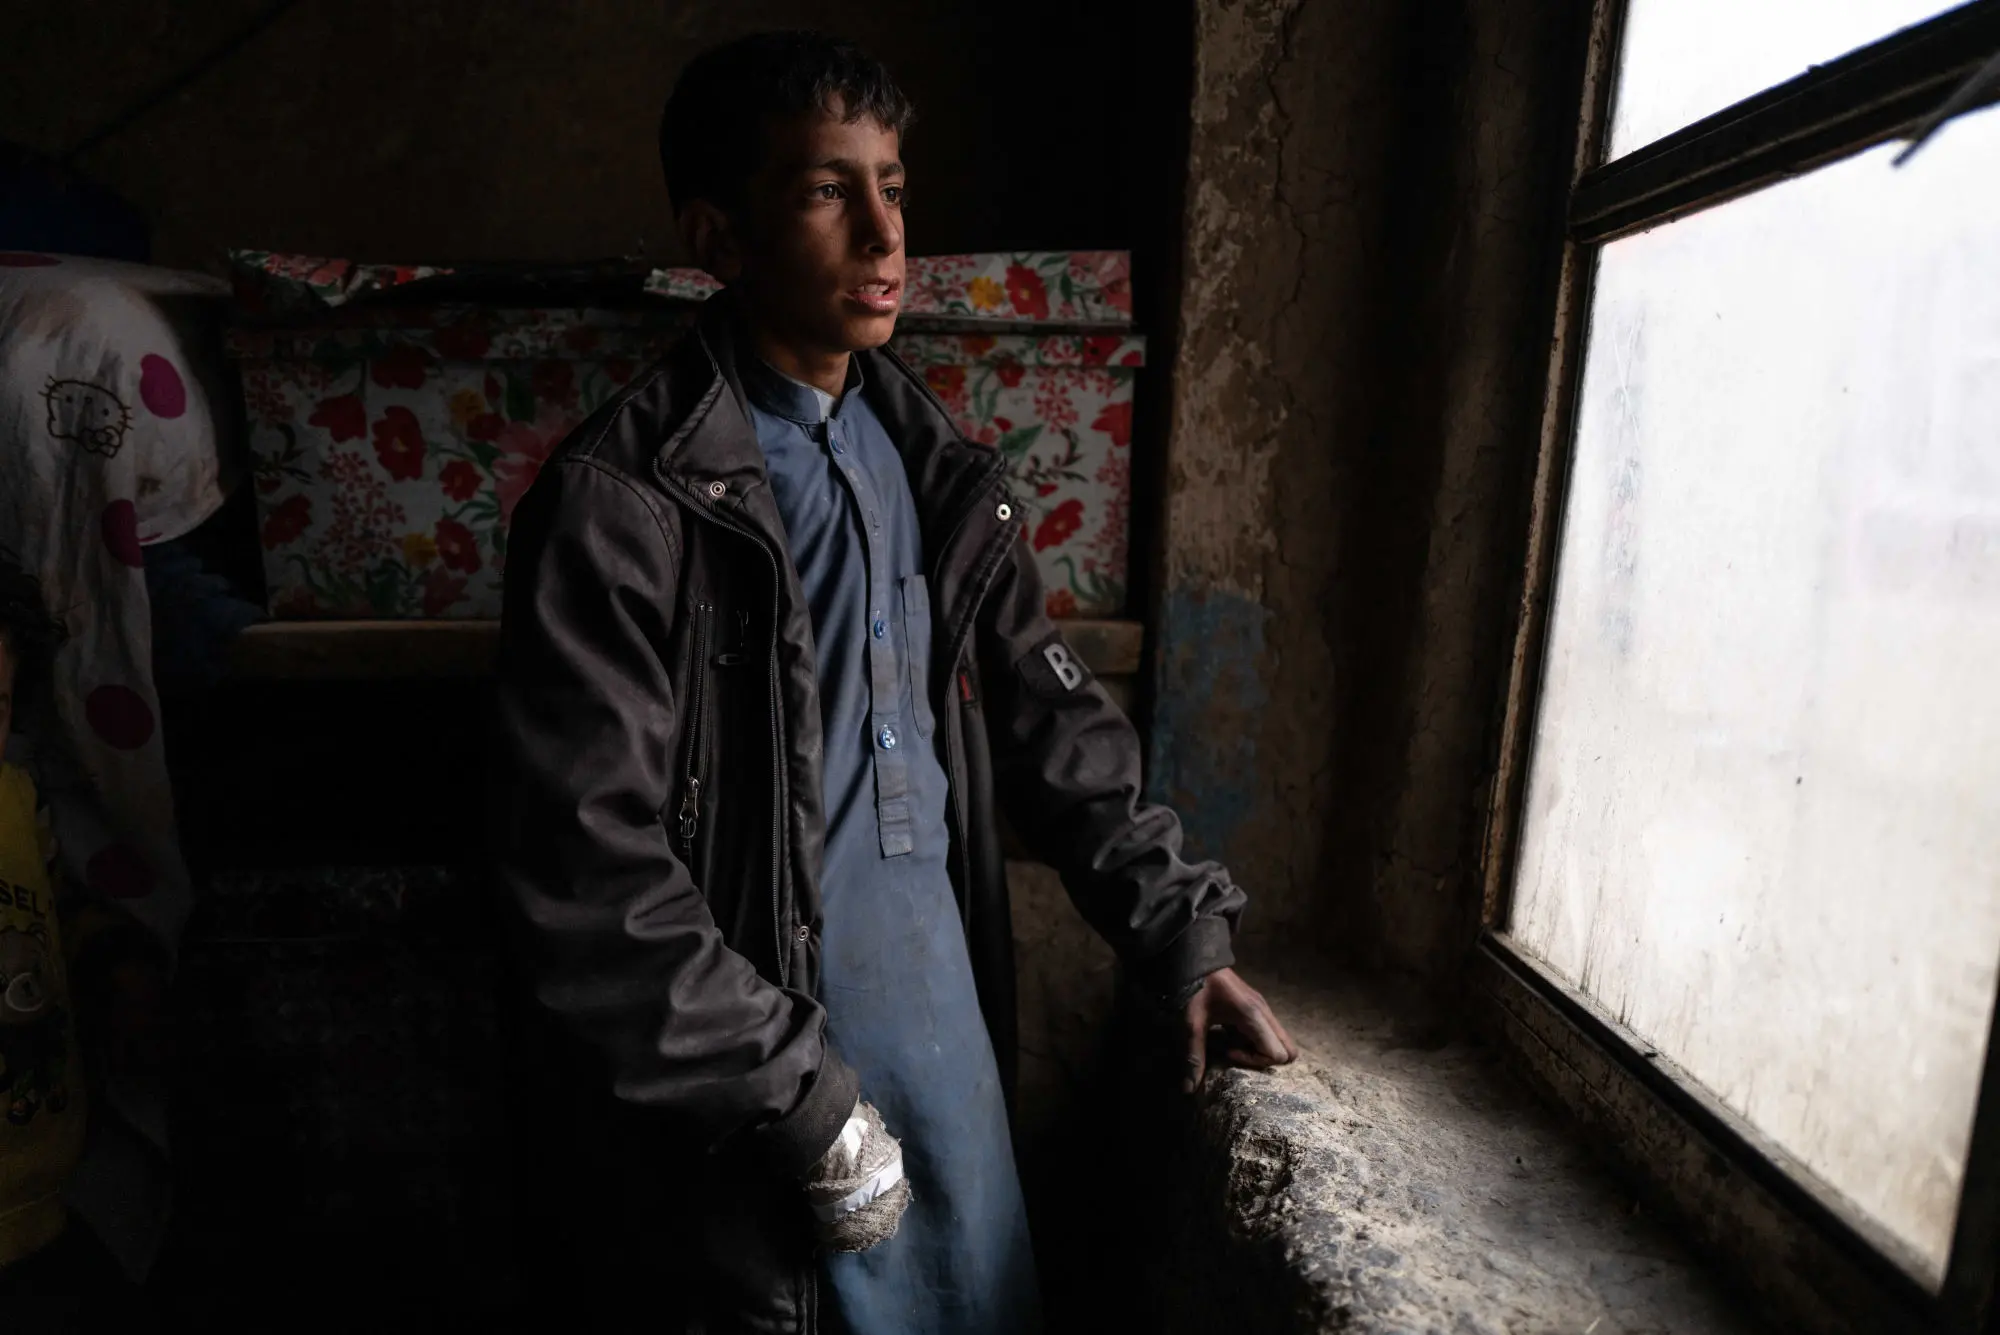 A young boy with bandaged hands looks out a window